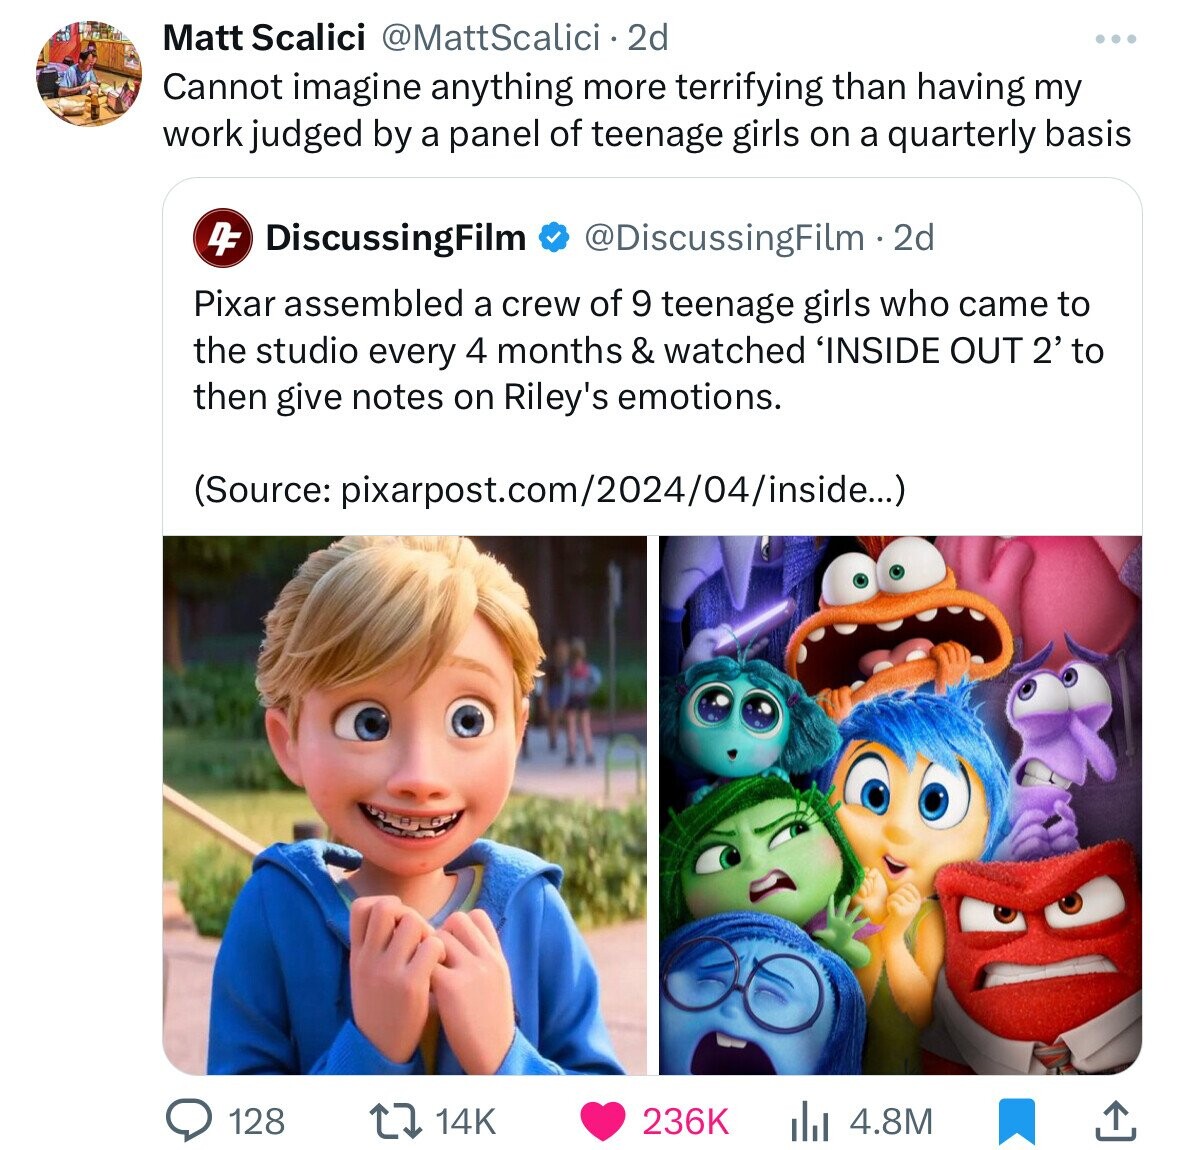 inside out 2 - Matt Scalici 2d Cannot imagine anything more terrifying than having my work judged by a panel of teenage girls on a quarterly basis 4 DiscussingFilm . 2d Pixar assembled a crew of 9 teenage girls who came to the studio every 4 months & watc